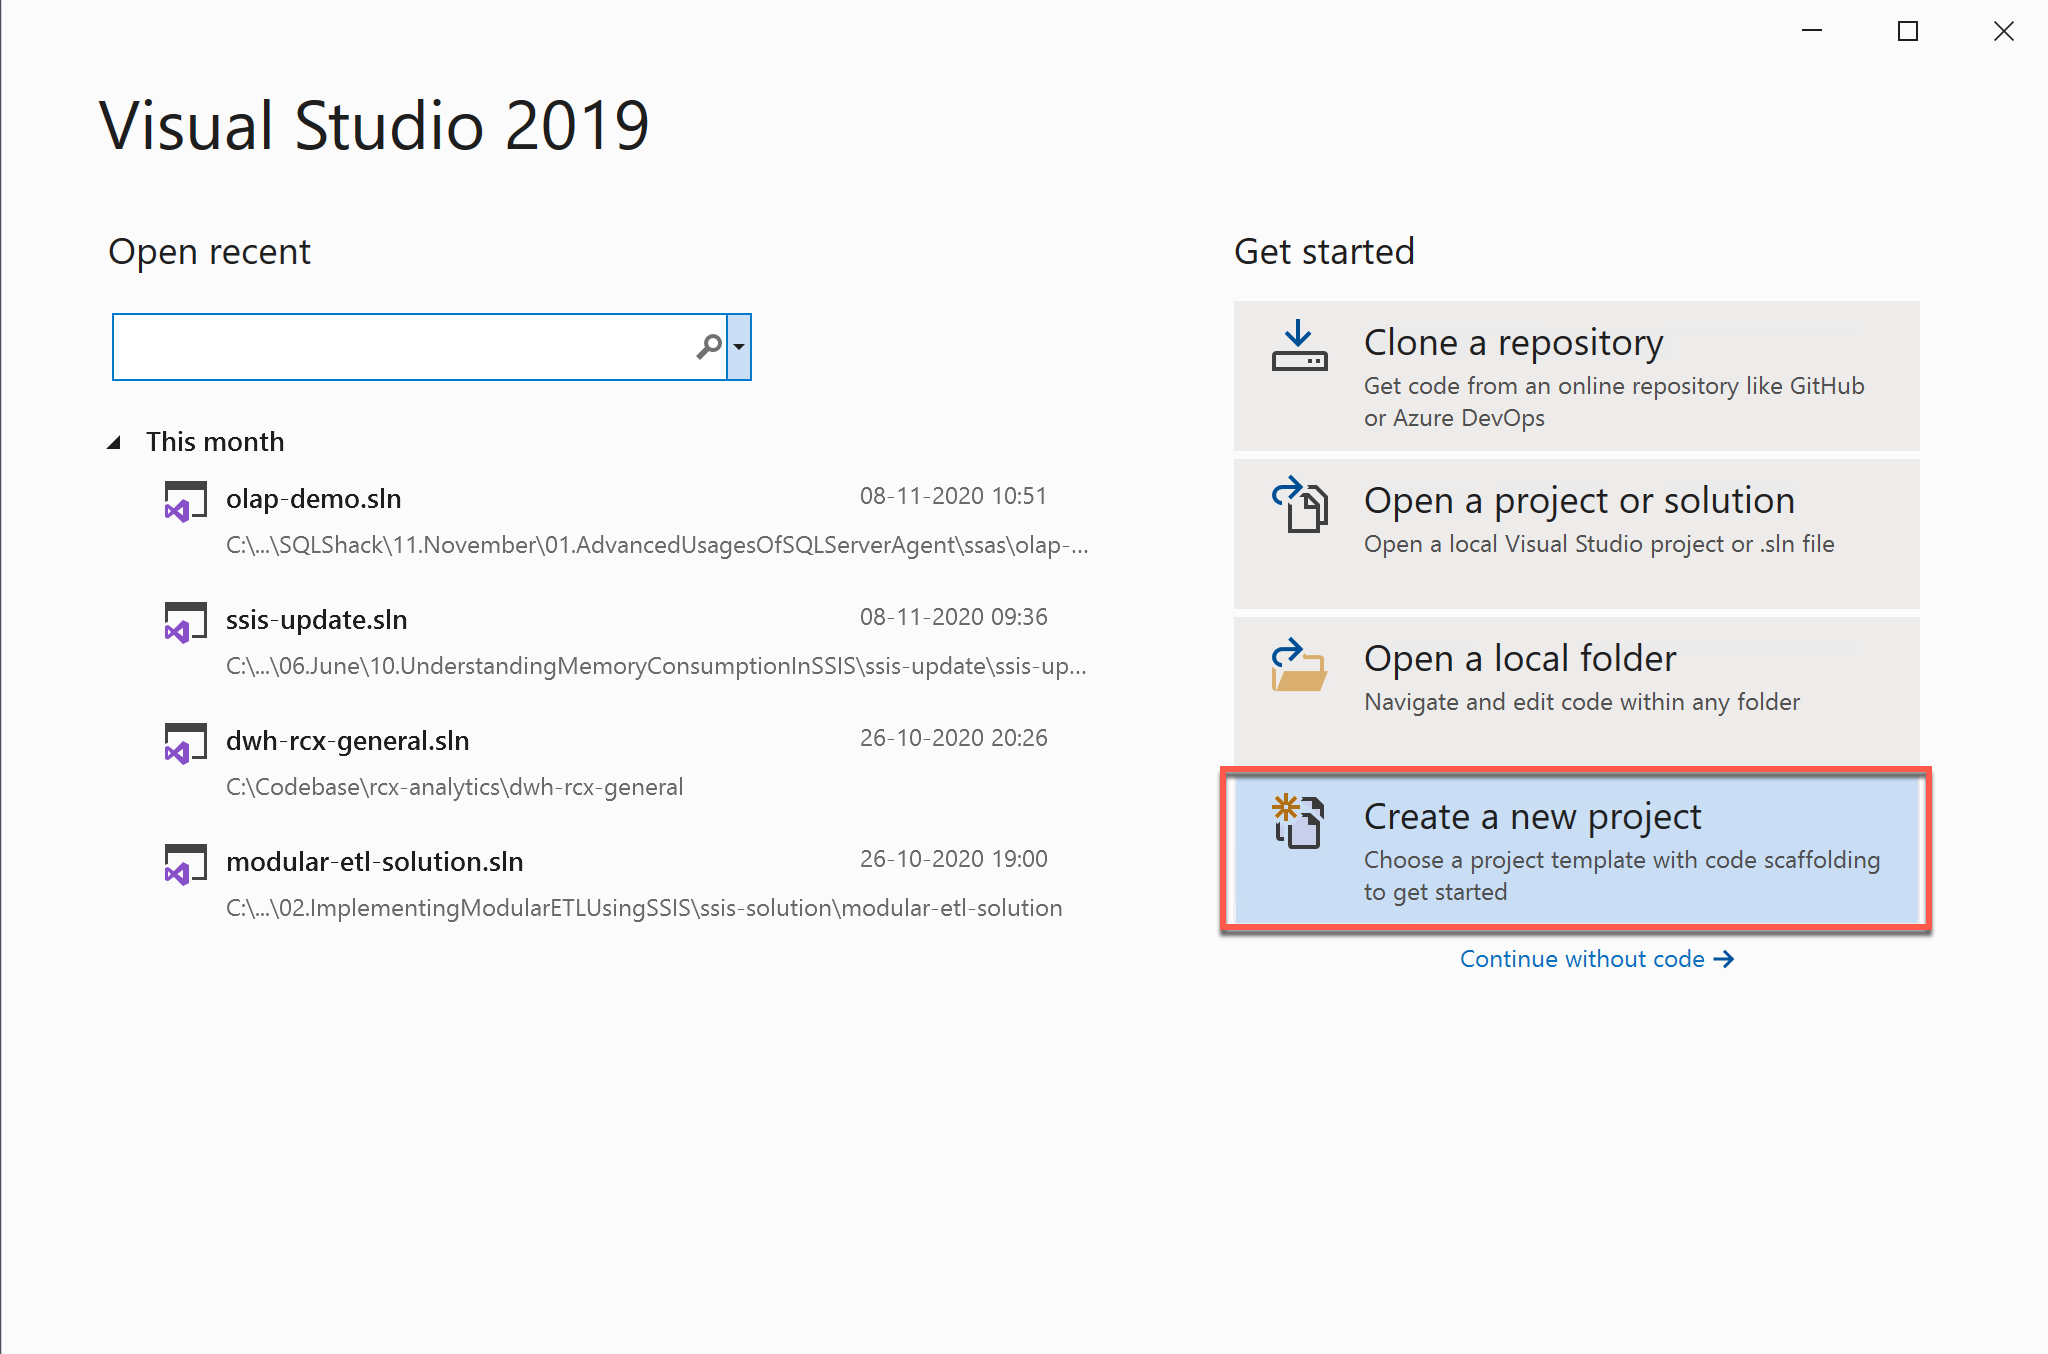 Creating a new project in Visual Studio